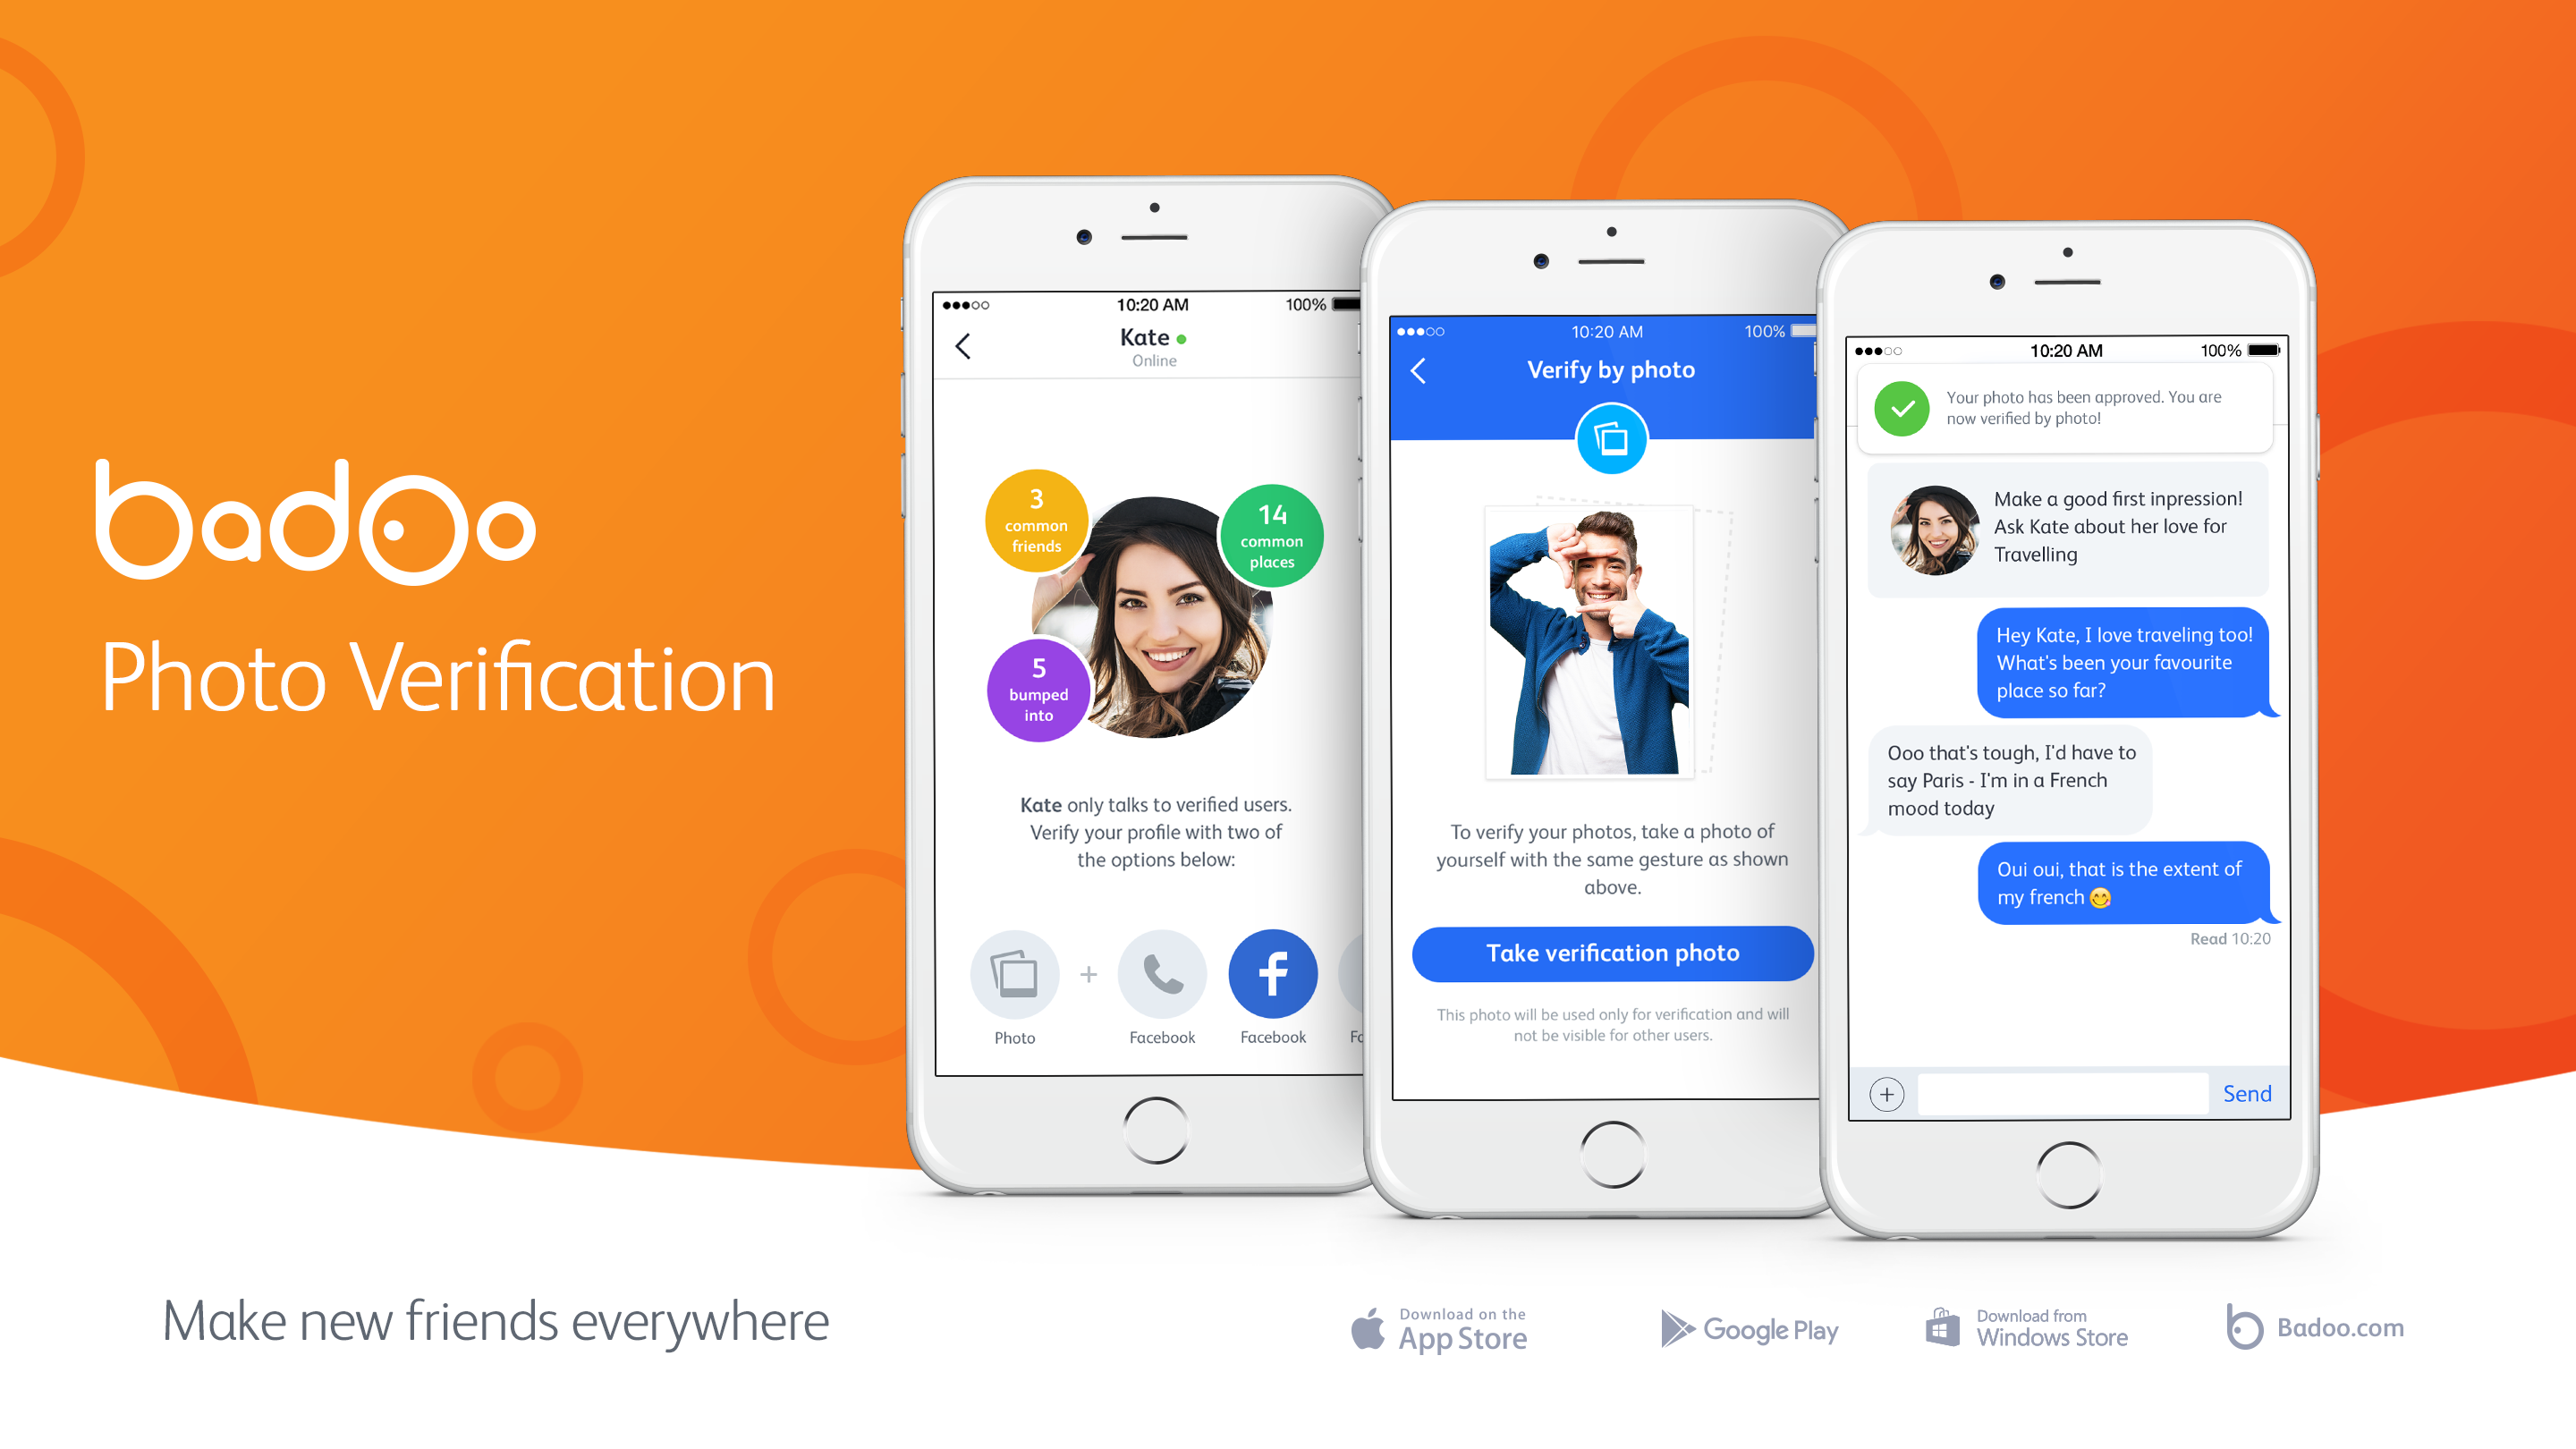 Without verification badoo Classification: avoid